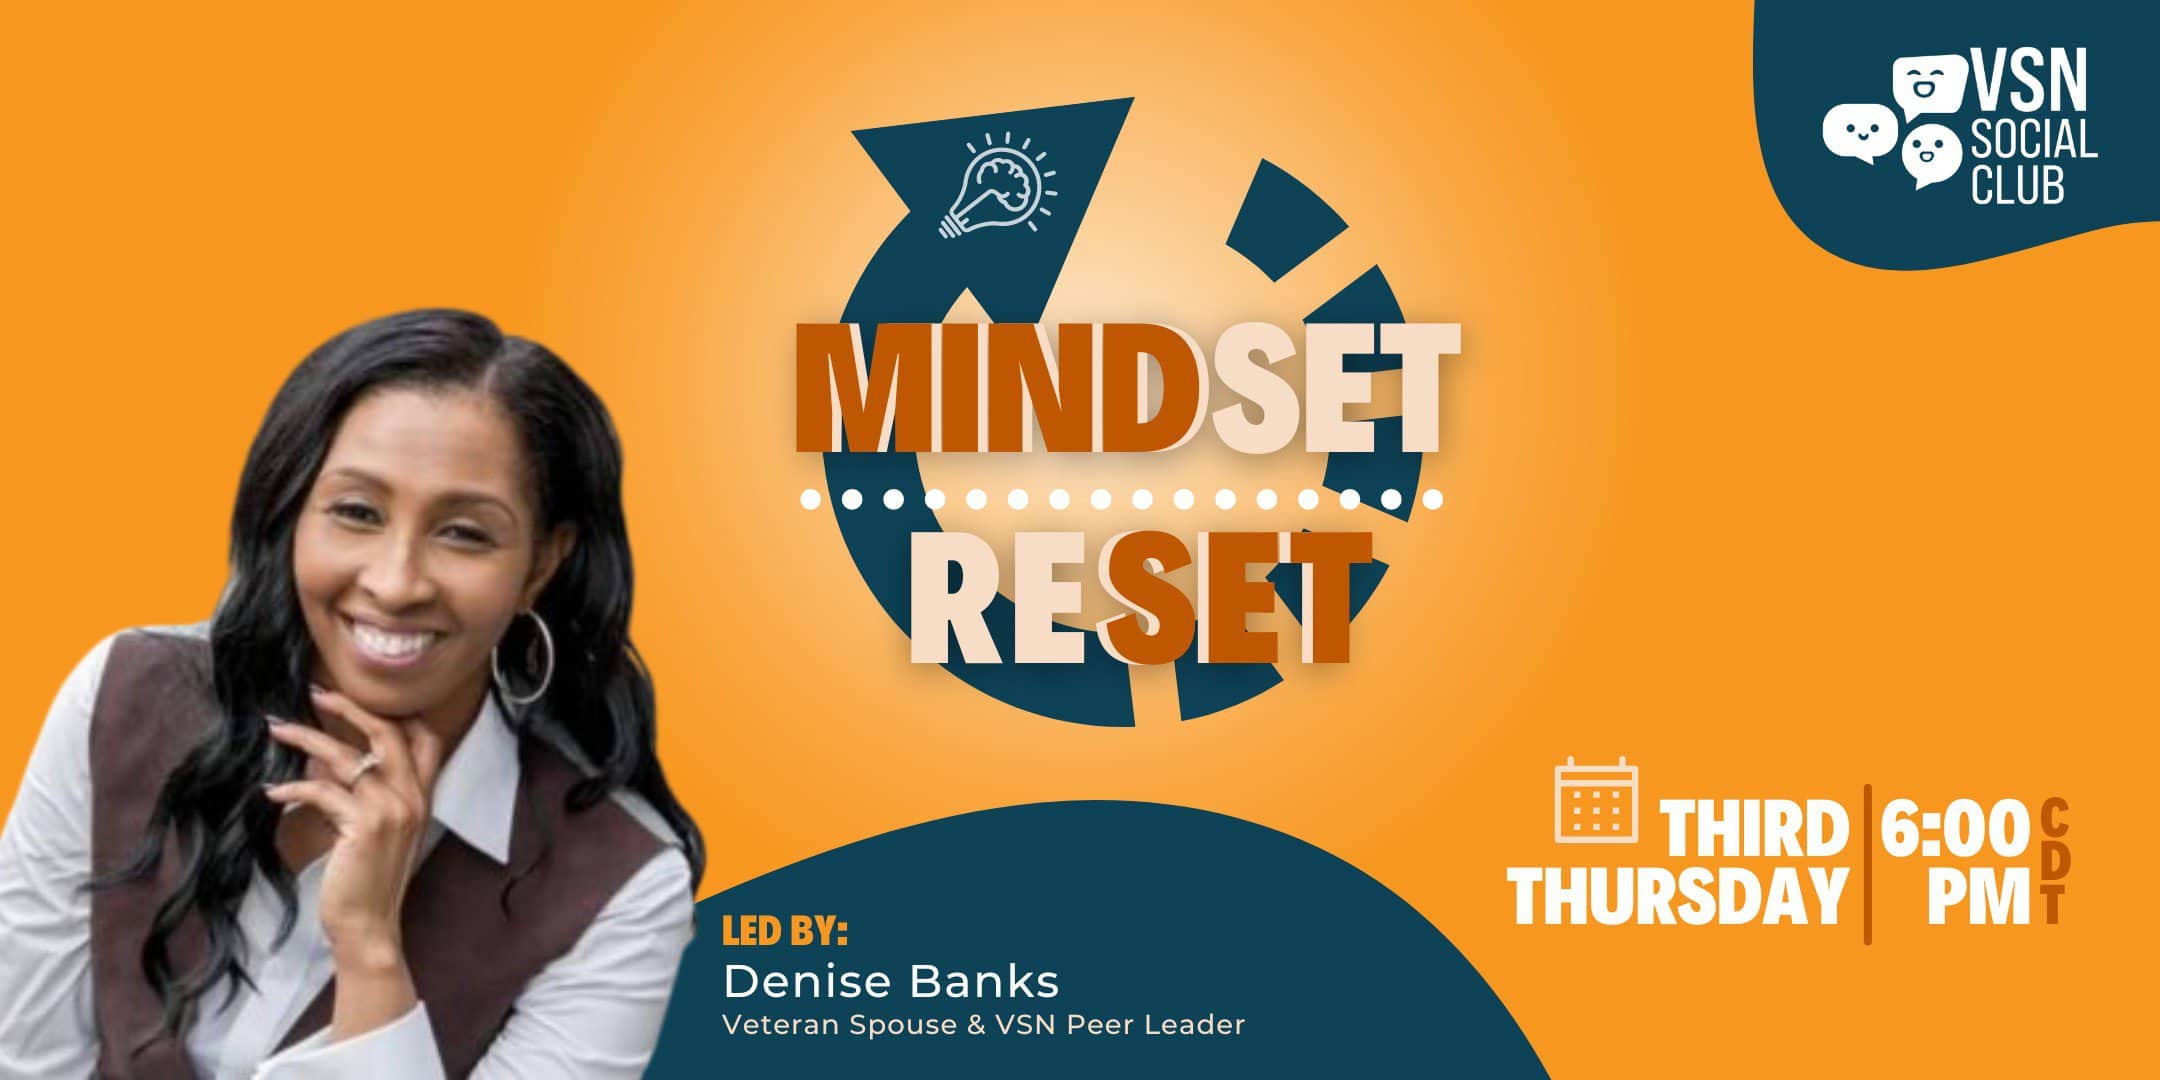 Mindset Reset on the third Thursday of each month